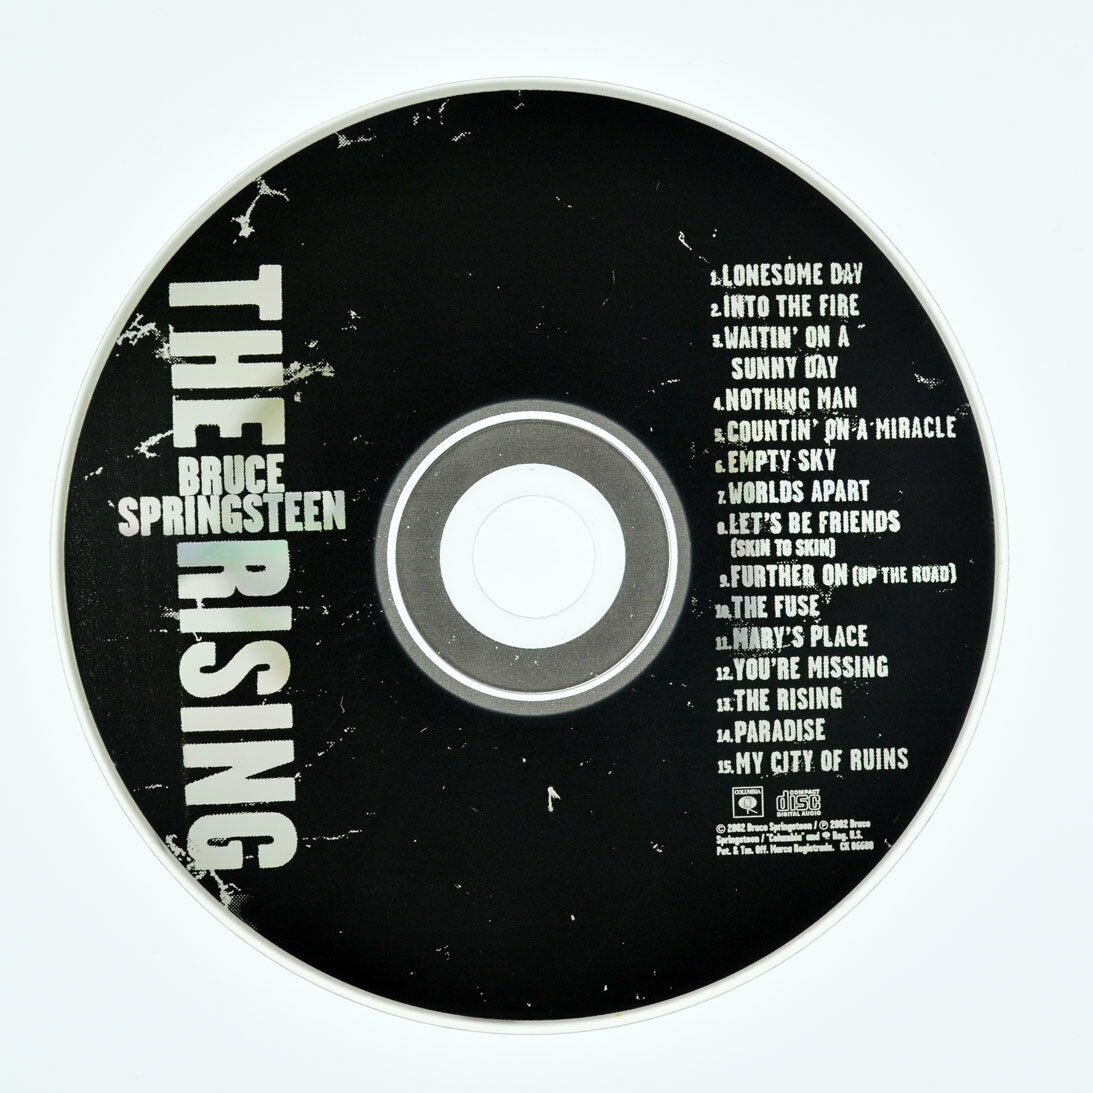 The Rising by Bruce Springsteen (CD, Jul-2002, Sony Music (USA)) DISC ONLY